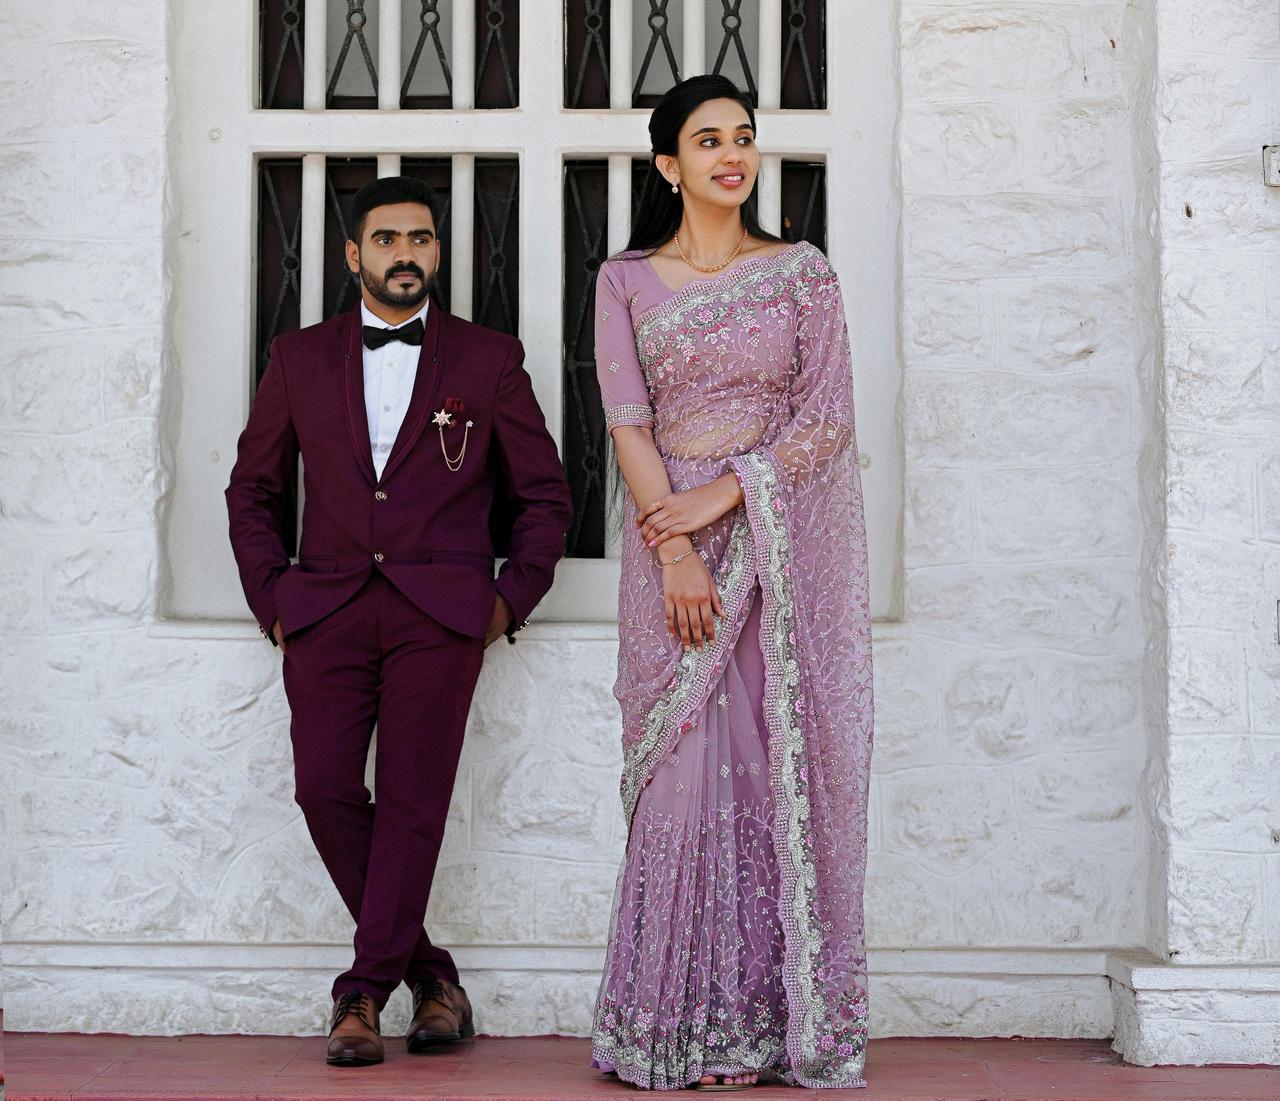 Modern Indian Wedding Guest Outfit | manonthelam.com